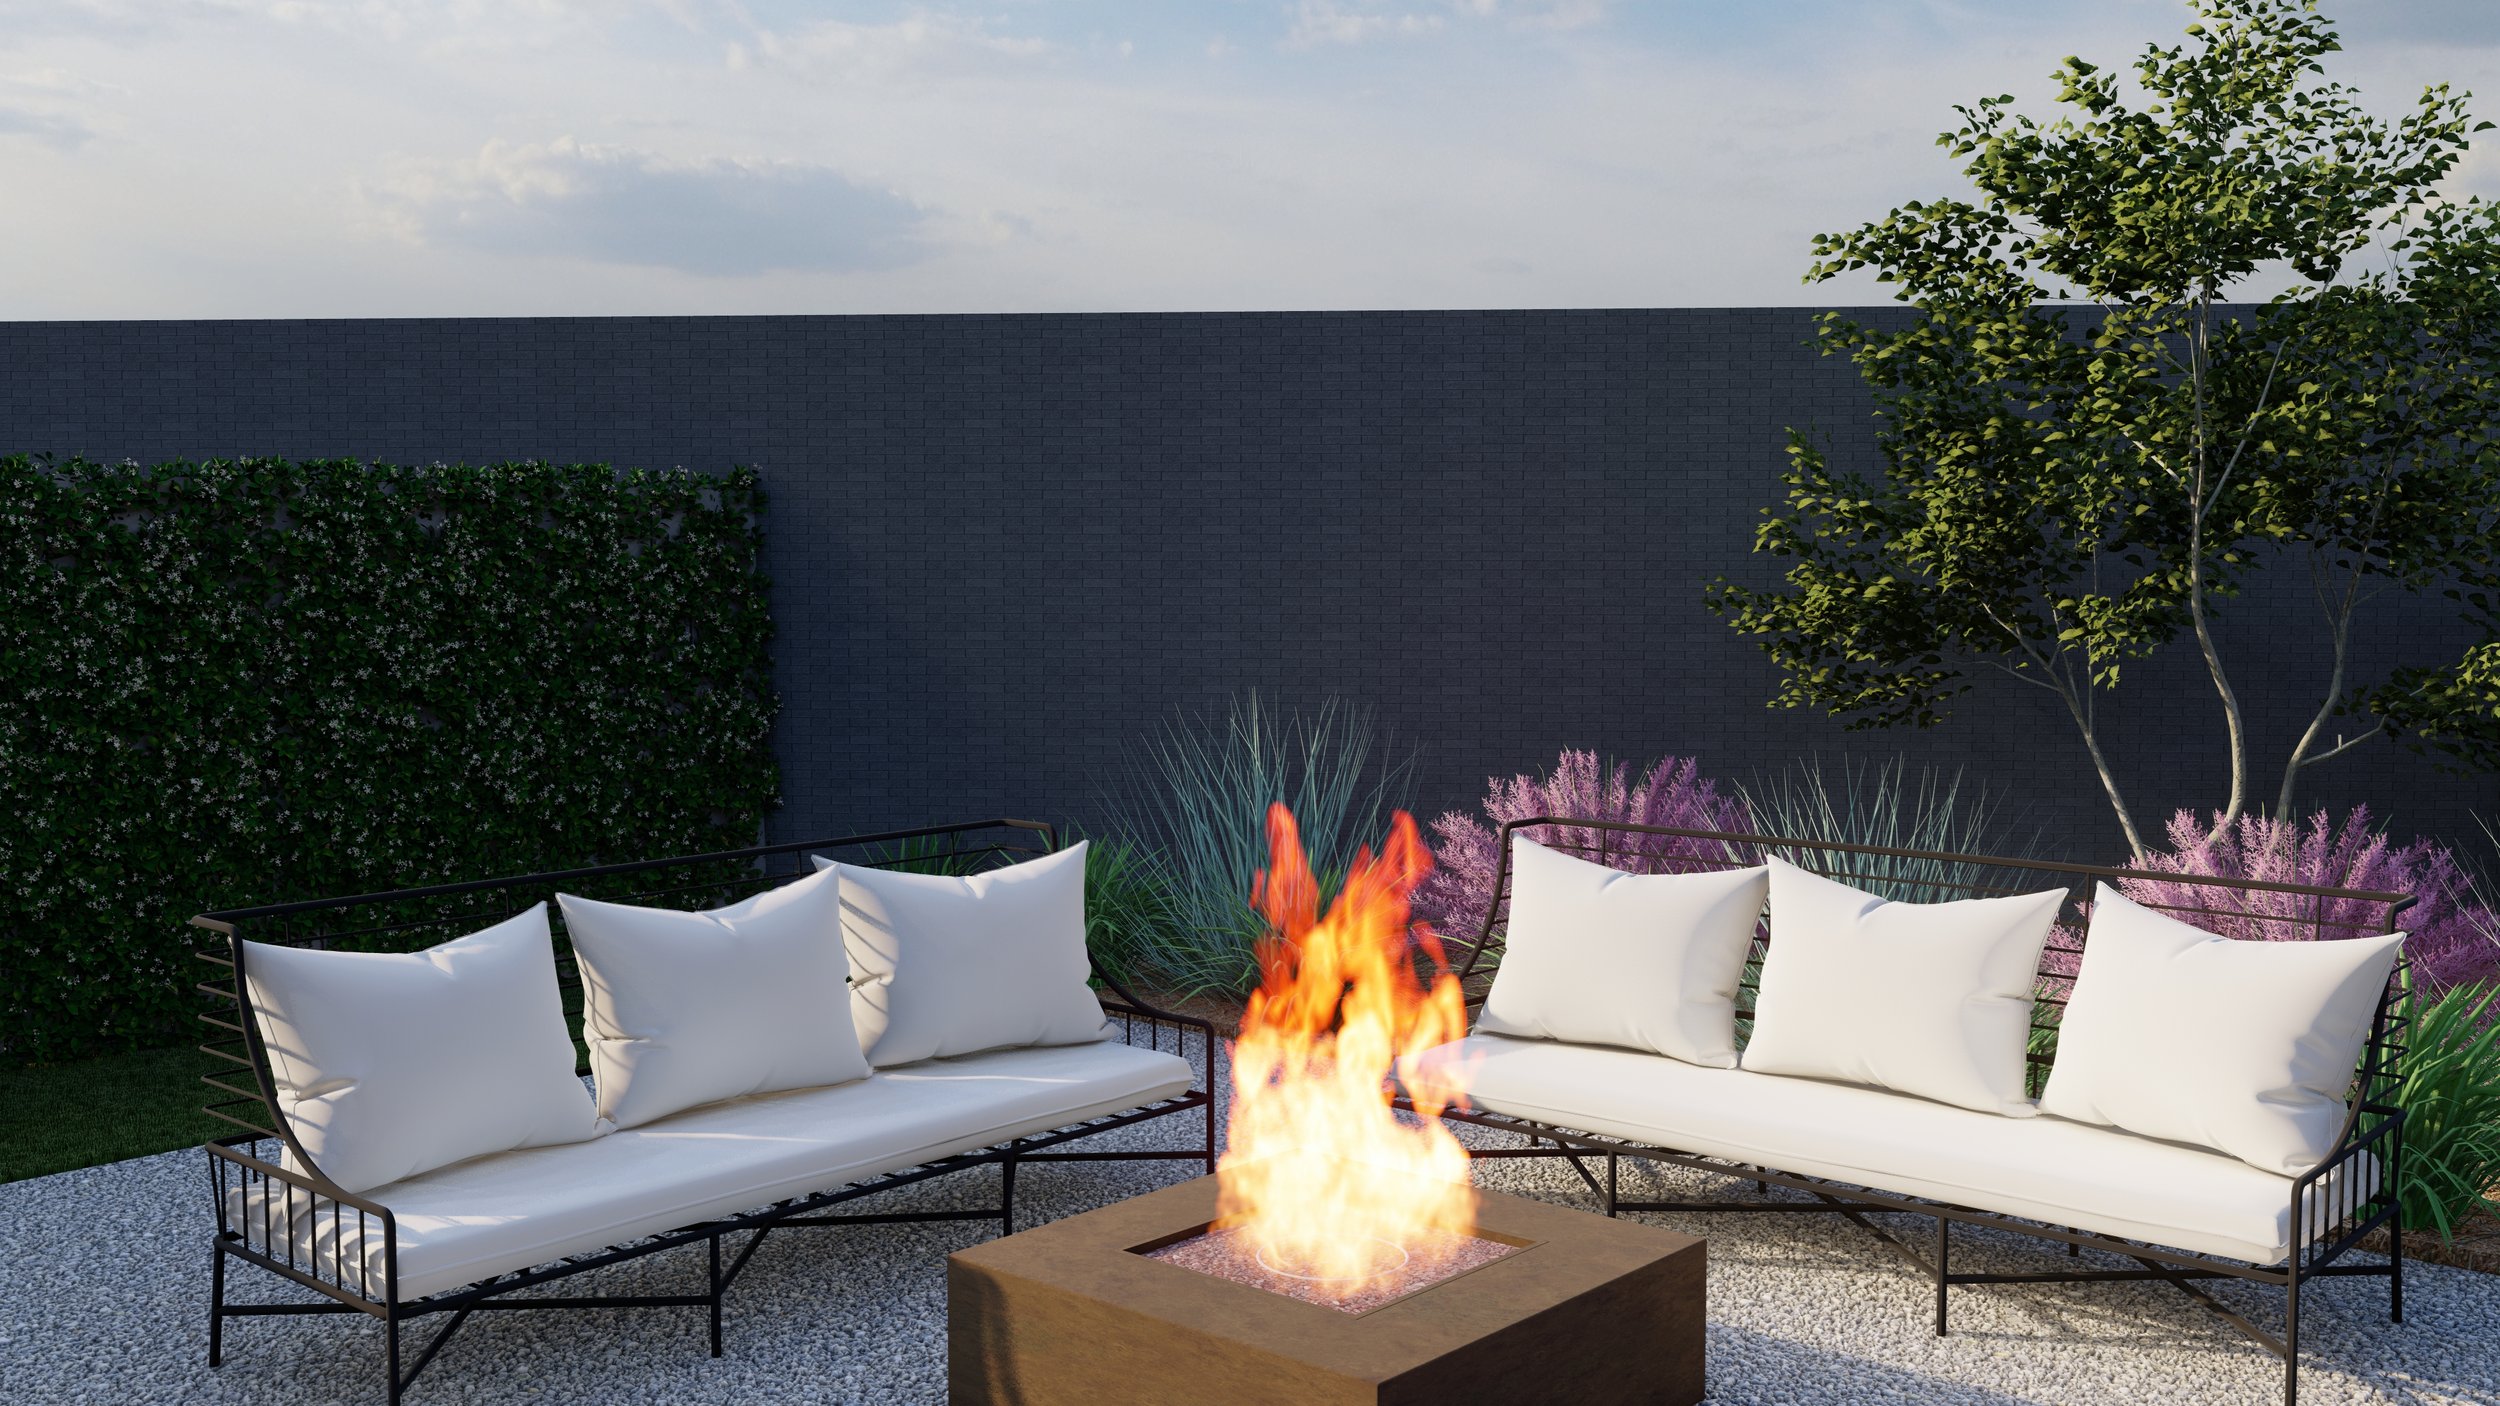 Two black metal outdoor sofas around a square fire pit on gravel patio.